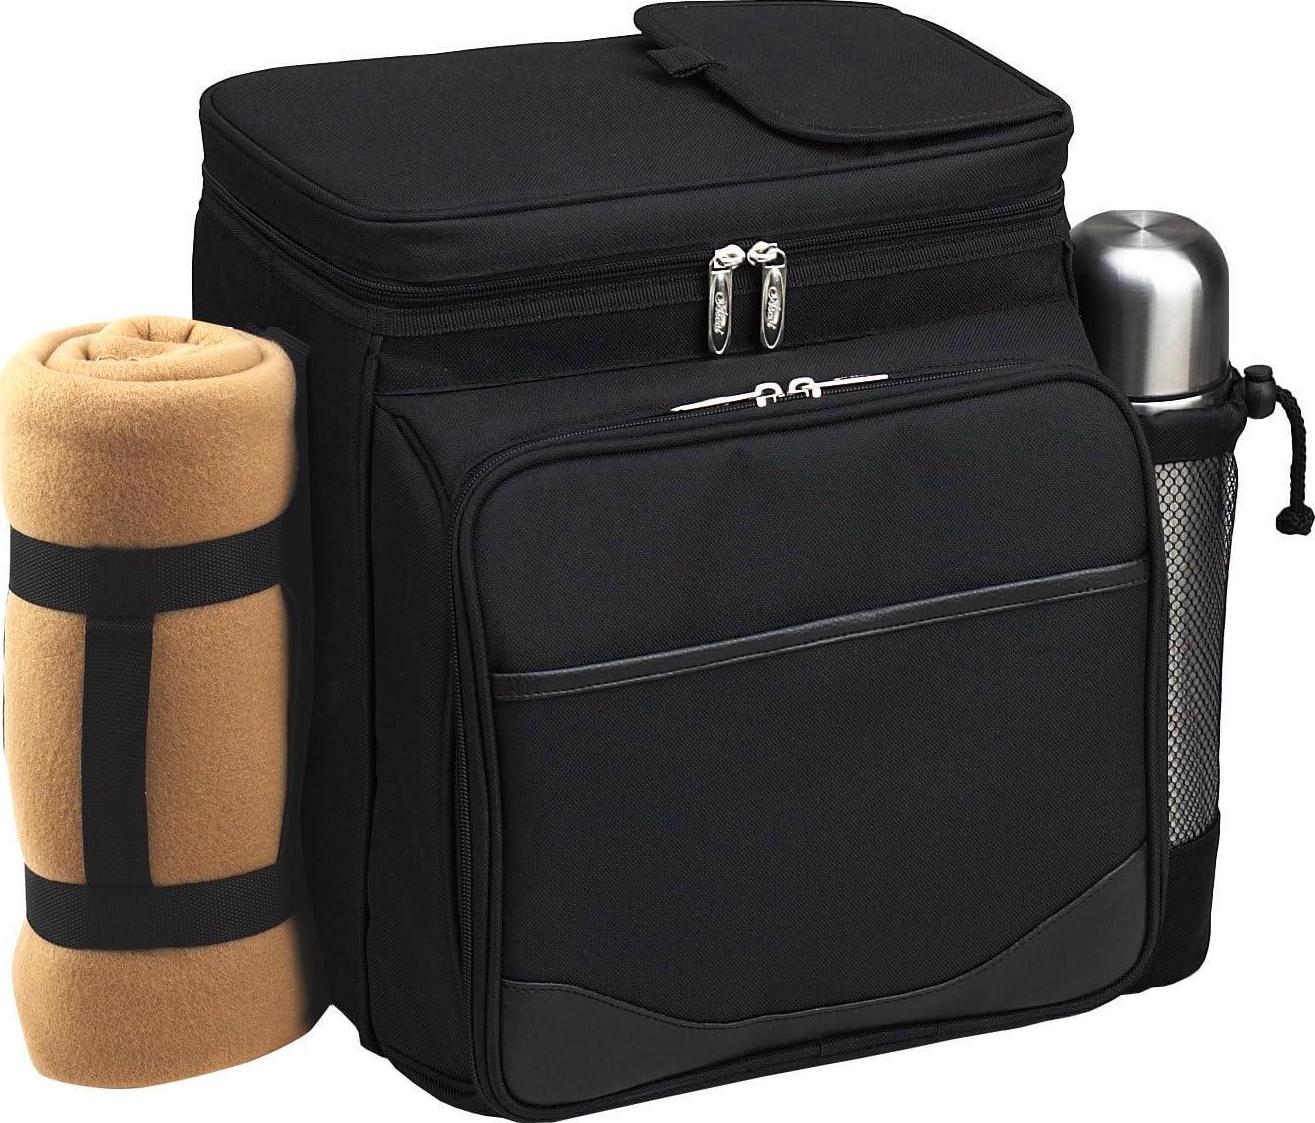 Picnic at Ascot Insulated Picnic Basket/Cooler Fully Equipped for 2 with Coffee Service and blanket - Black